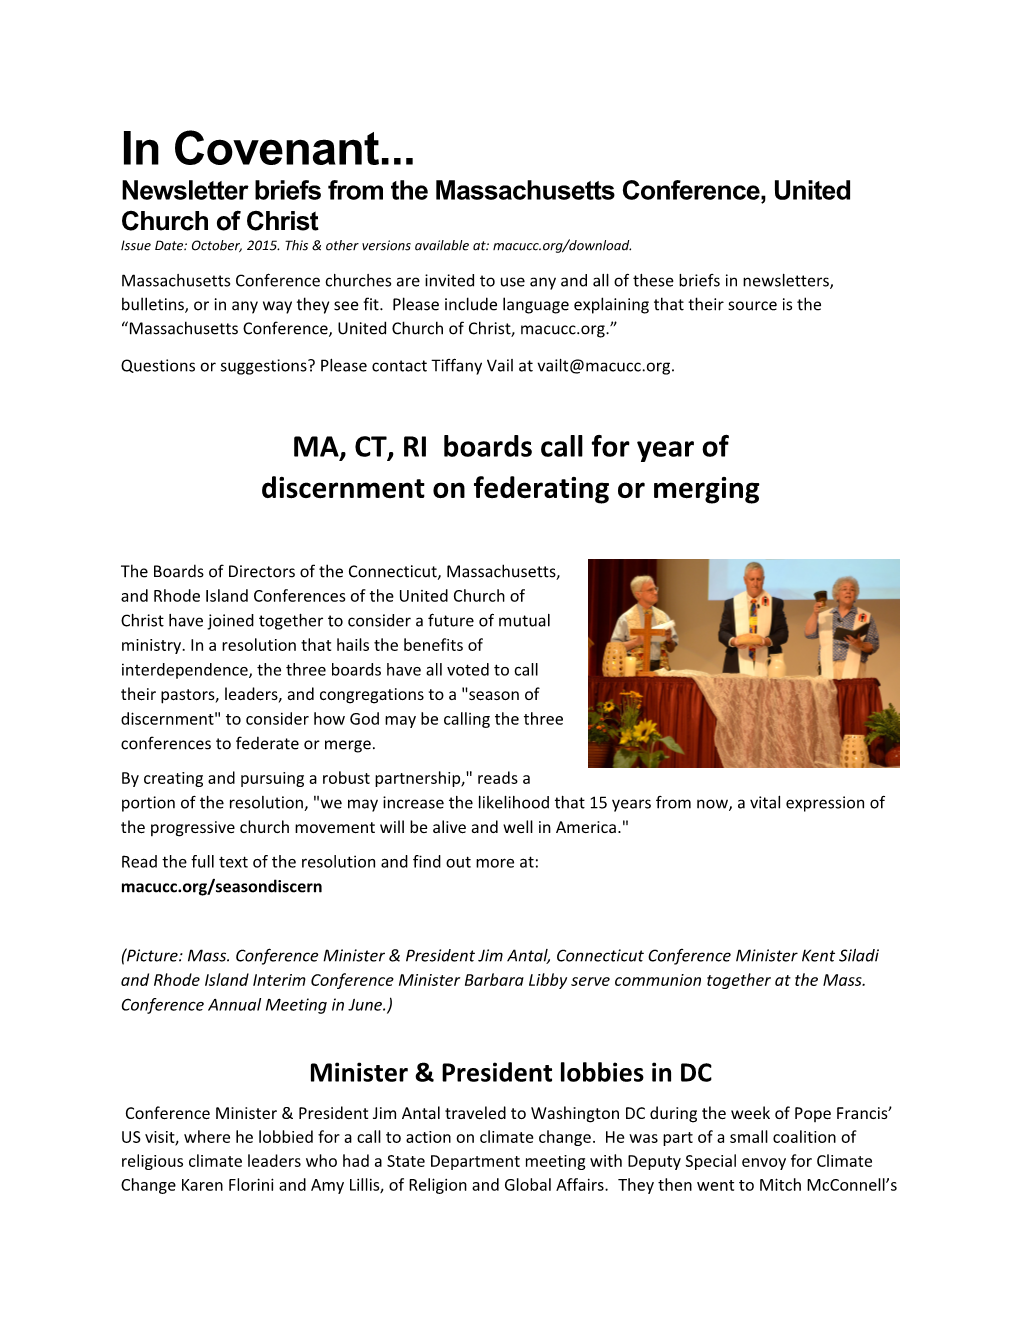 Newsletter Briefs from the Massachusetts Conference, United Church of Christ